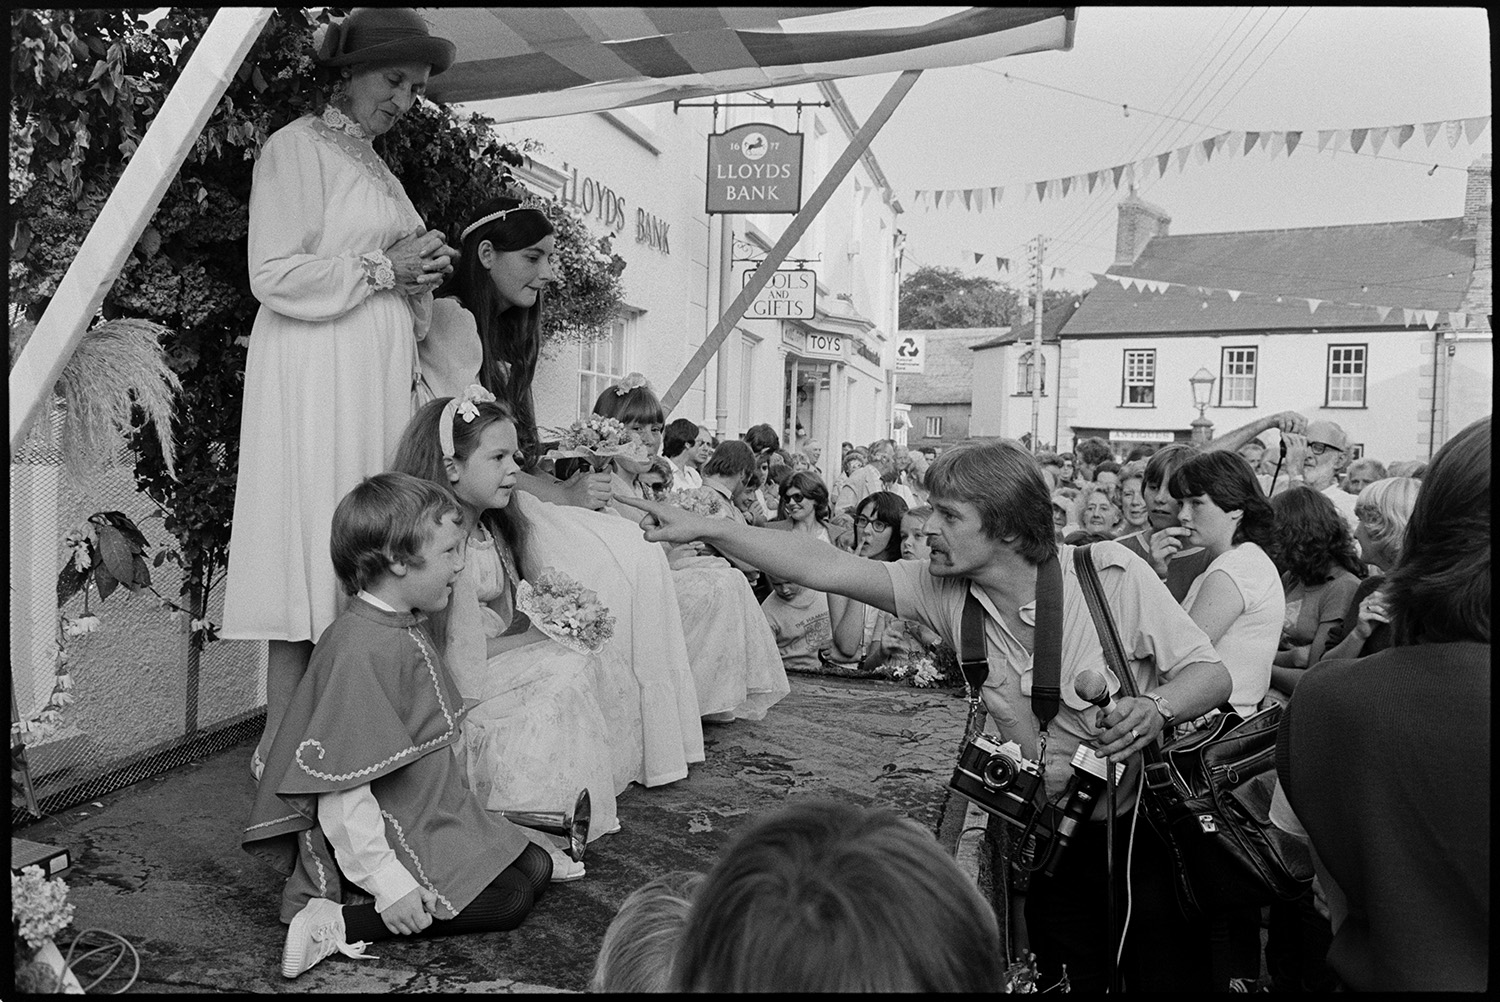 Procession with Fair Queen and band, speech from window, raising the glove, spectators. 
[A man arranging the Chulmleigh Fair Queen and her attendants sat on a podium outside Lloyds Bank, with another woman, at Chulmleigh Fair. He is going to photograph or film them. People are gathered around watching.]